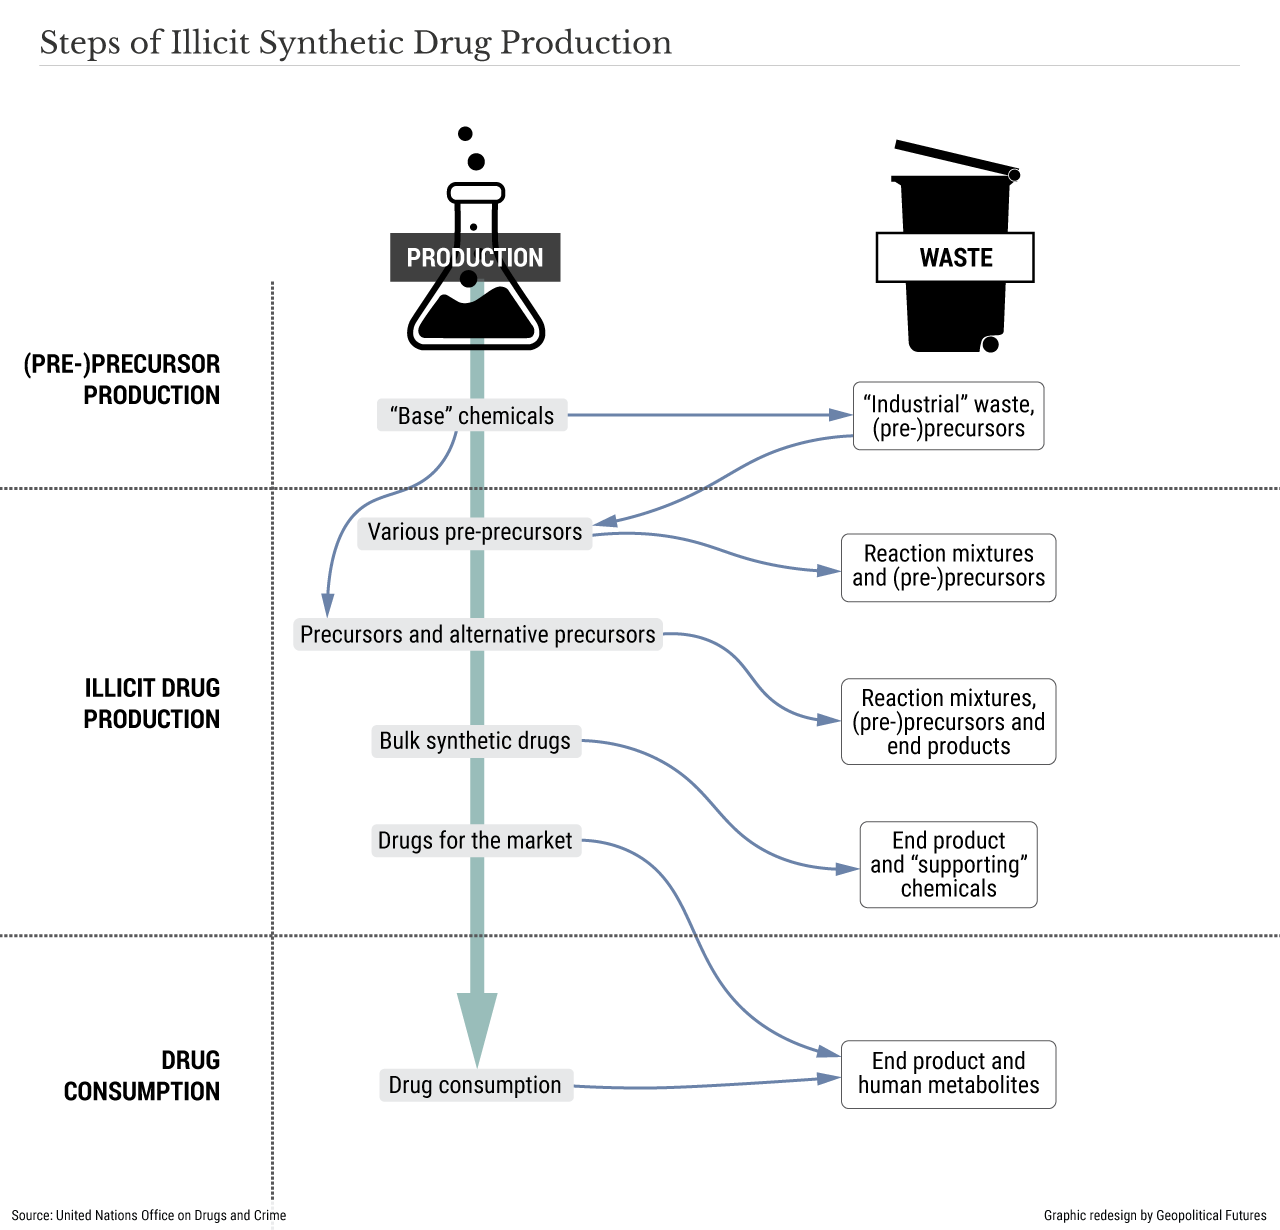 Steps of Illicit Synthetic Drug Production